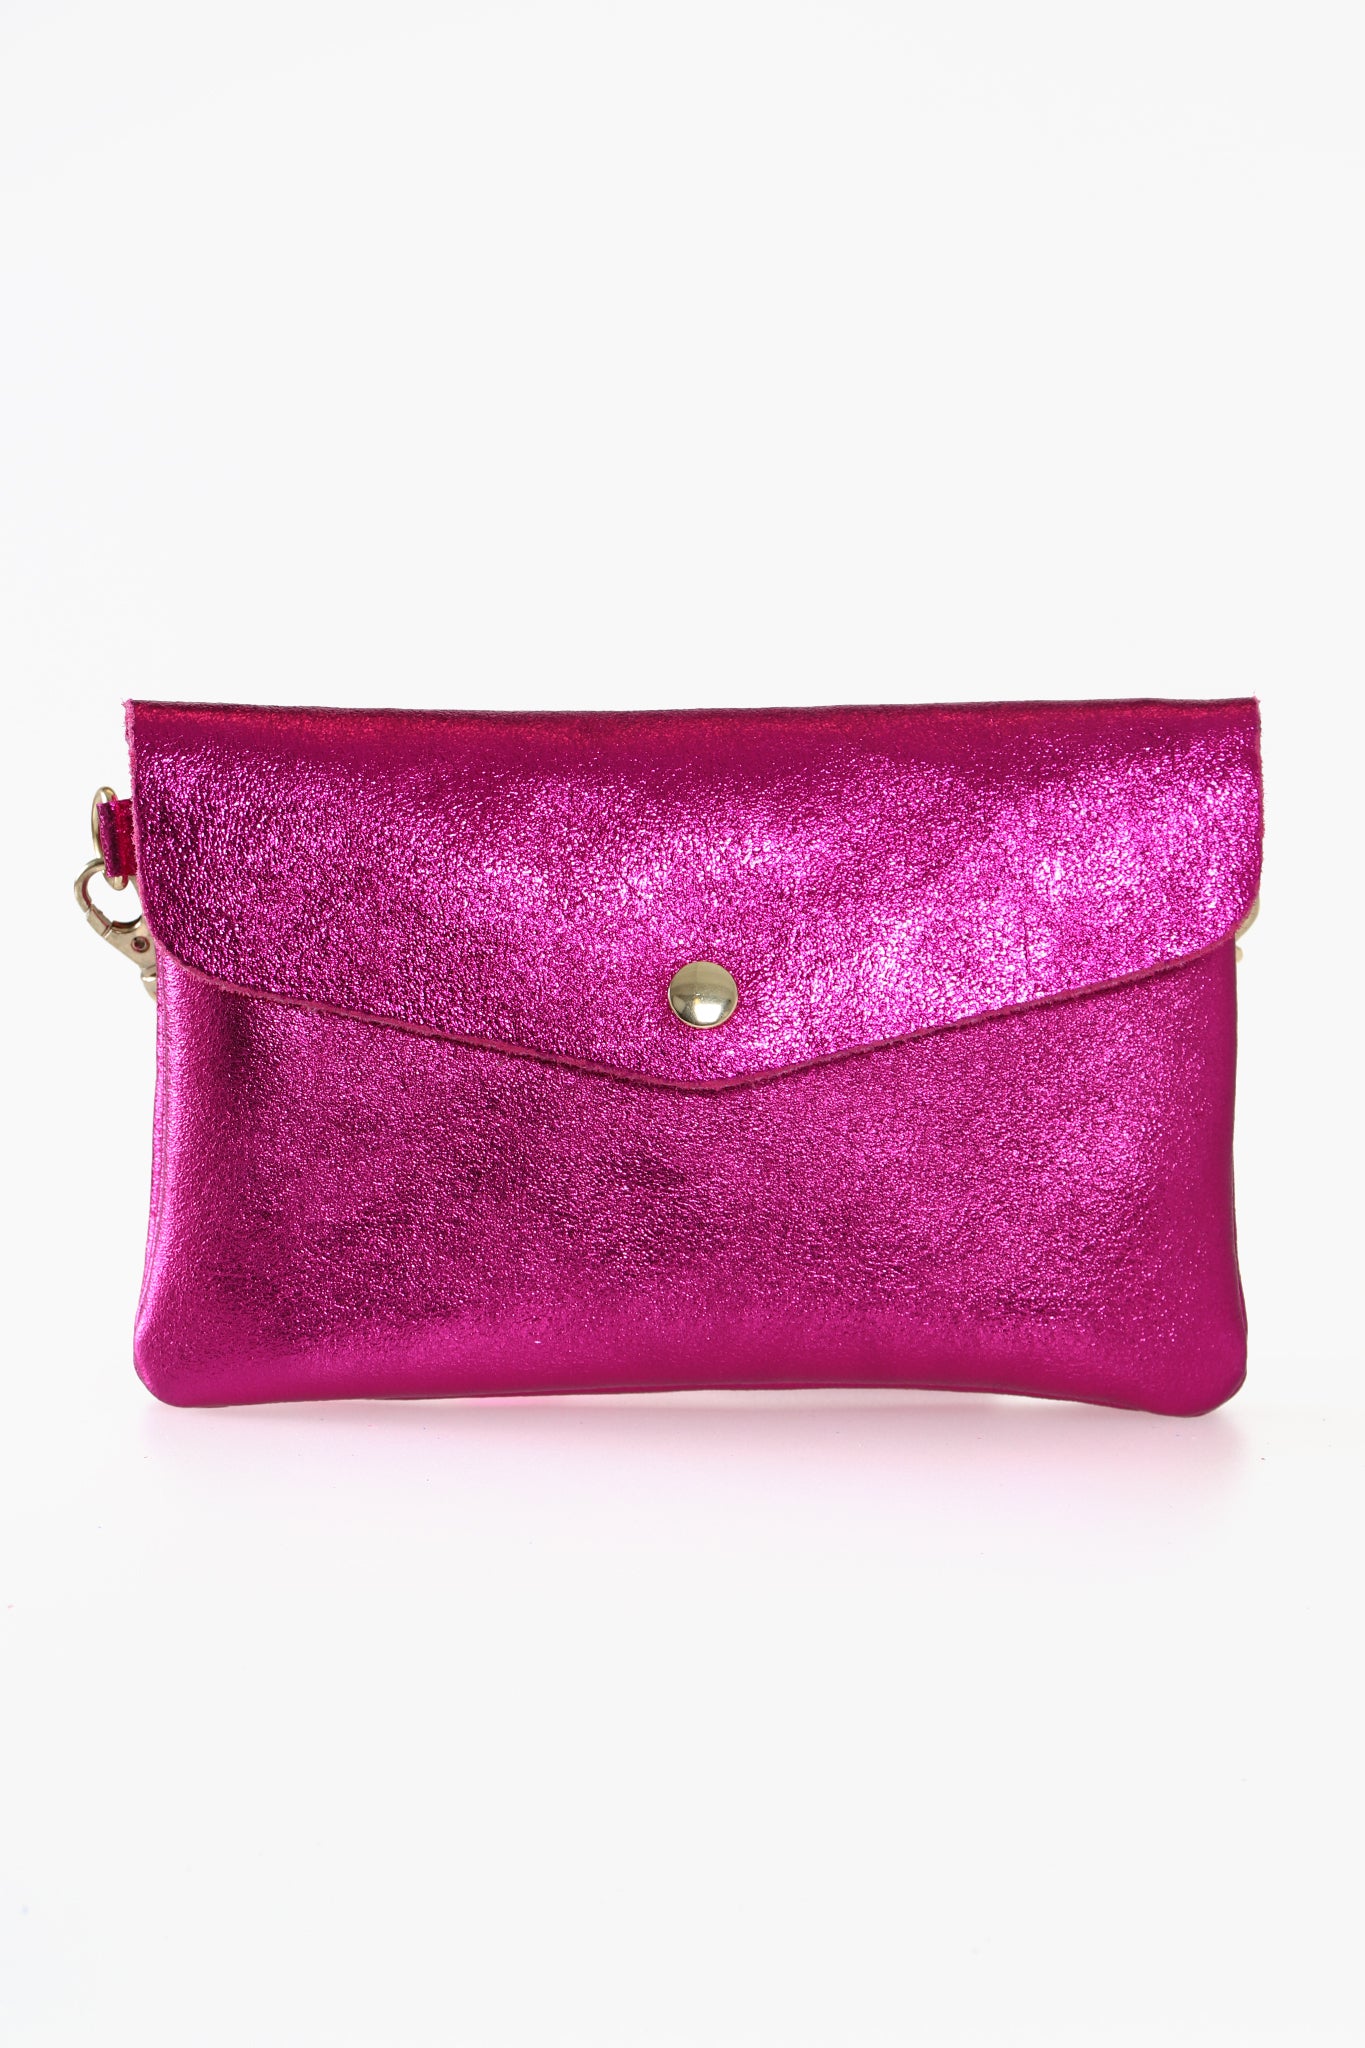 FashionPuzzle Large Envelope Clutch Bag with Chain Strap (Oversize),  Burgundy, One Size : Amazon.in: Fashion